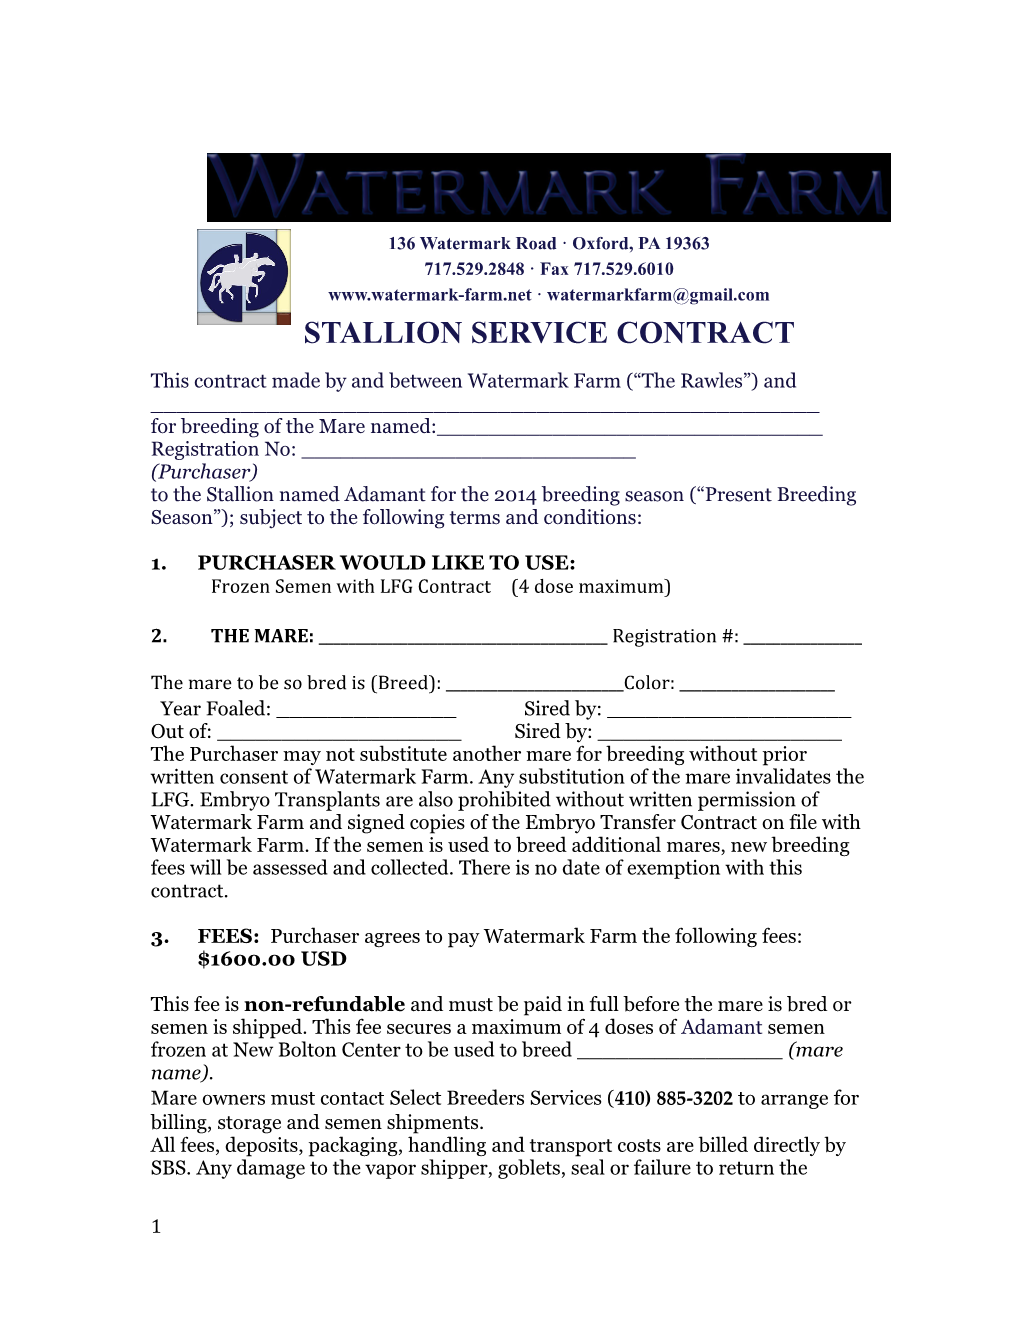 This Contract Made by and Between Watermark Farm ( the Rawles ) And